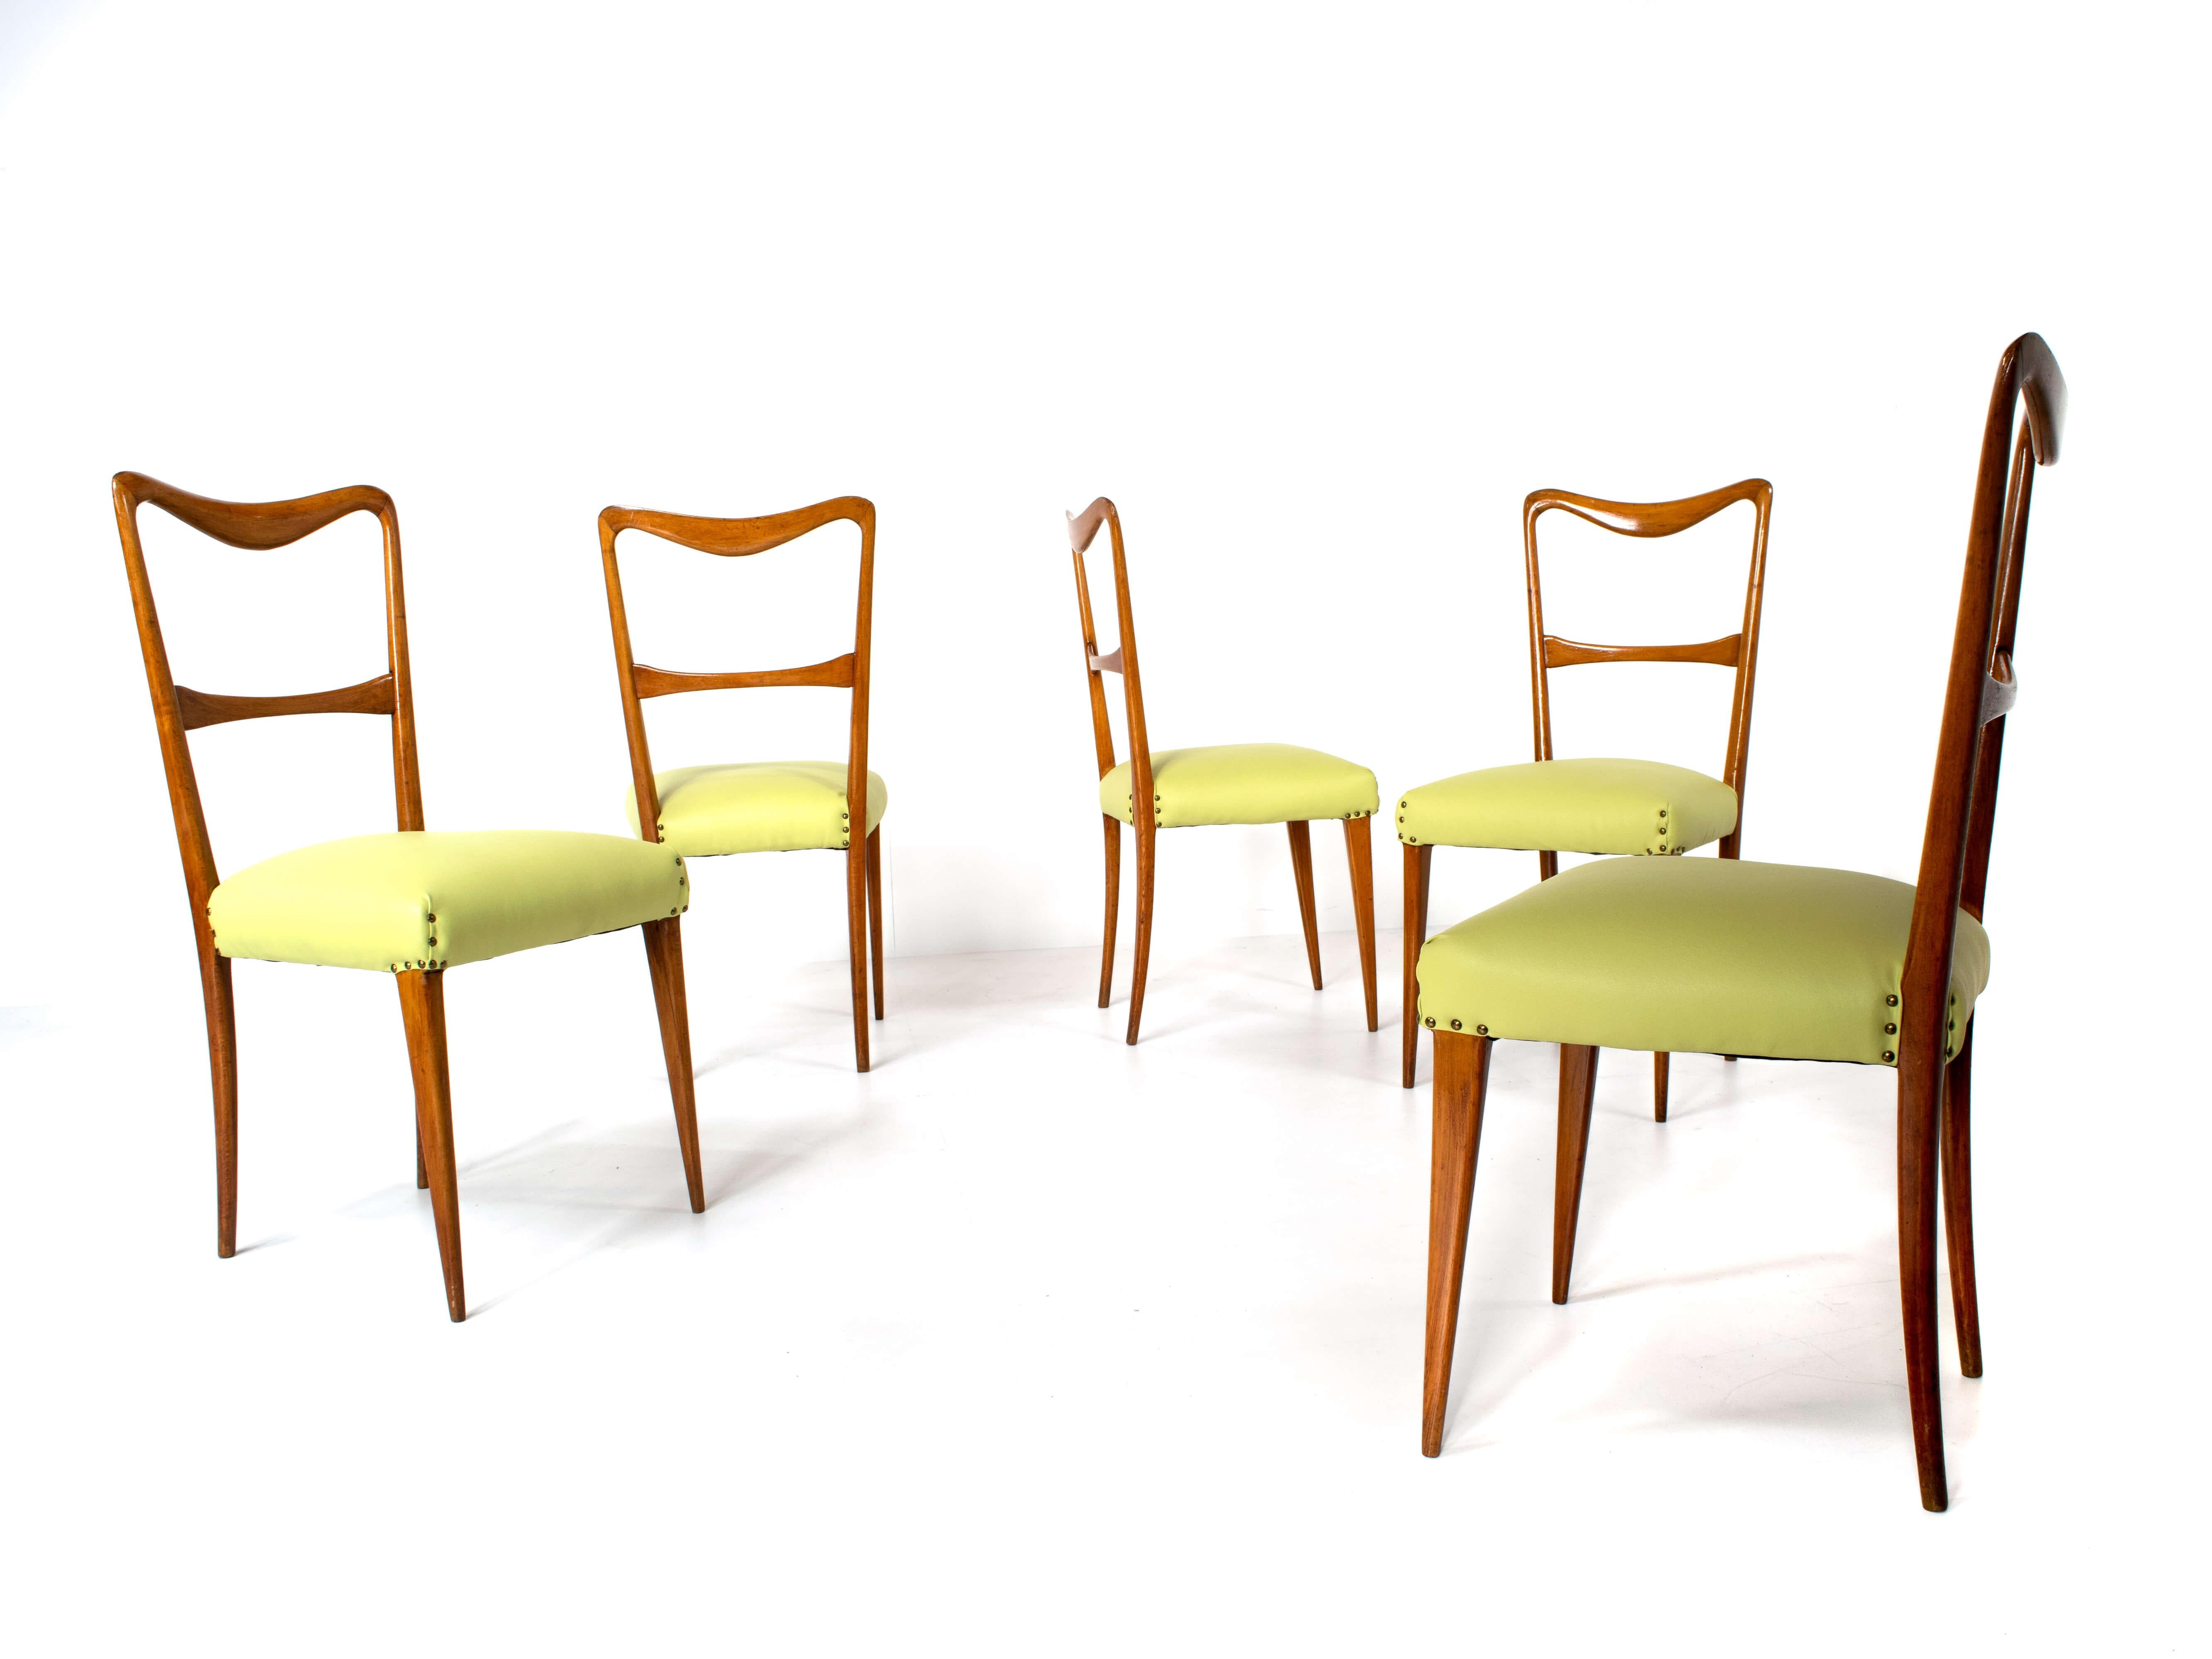 Set of 5 Italian modern dining chairs in style of Paolo Buffa from the 1950s. These chairs have a very elegant back with round curves. The chairs are newly upholstered with a green leather seating. They are light as a feather and easy to handle,